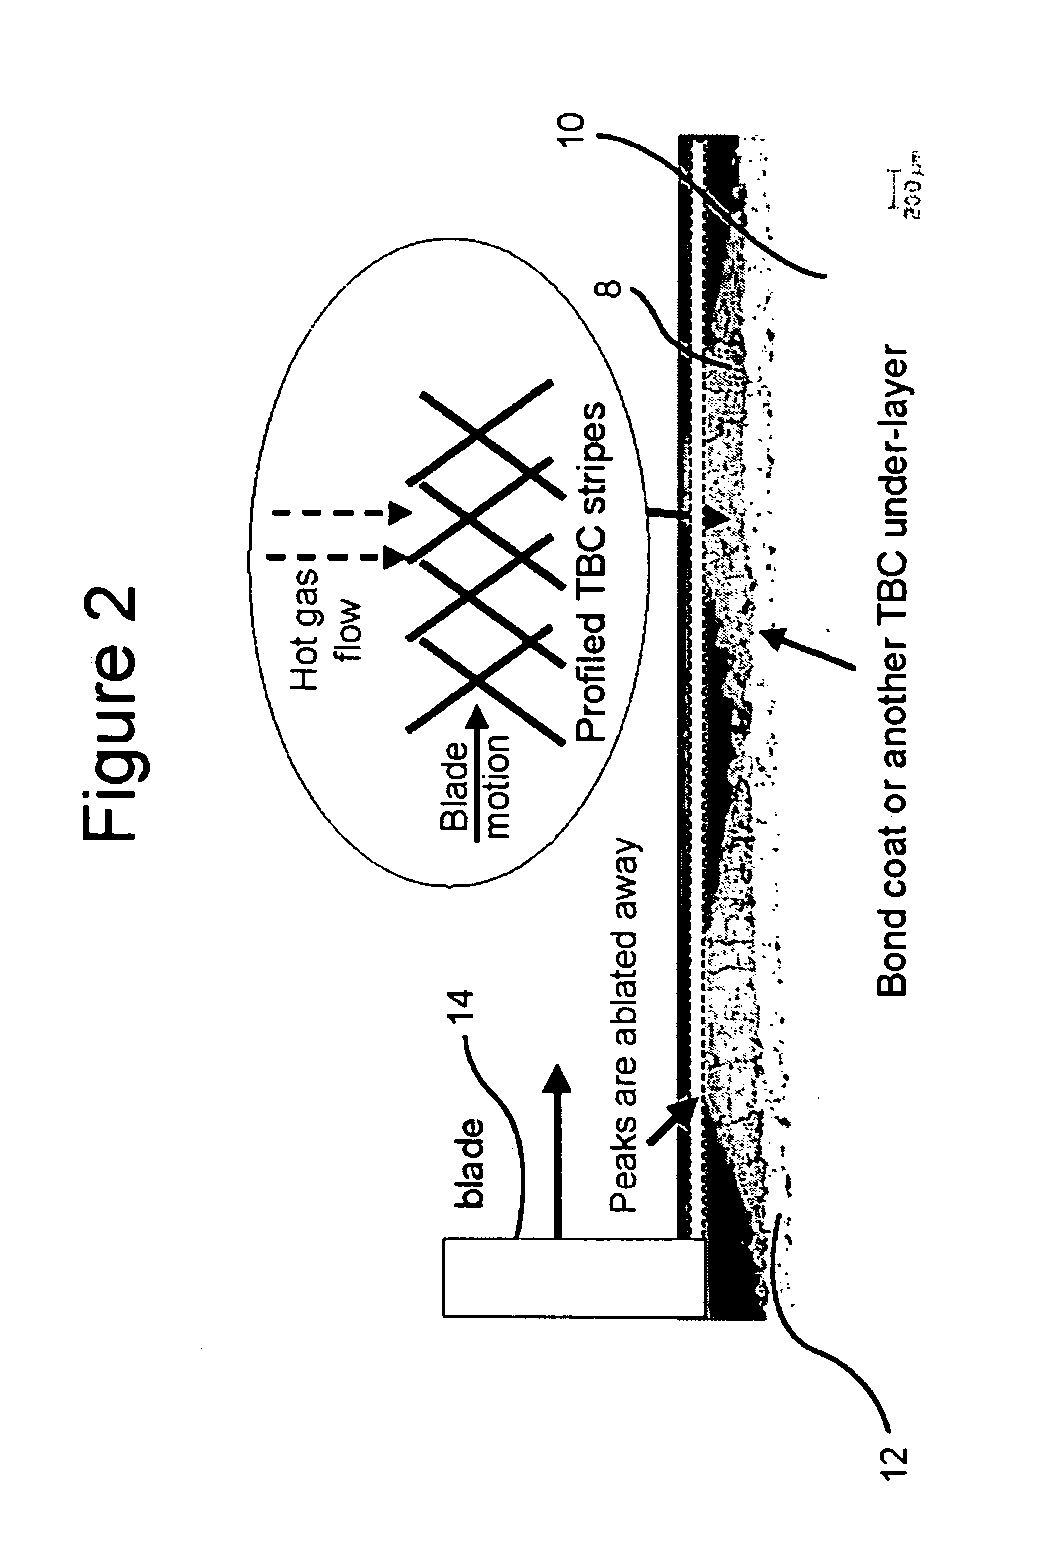 7FAstage 1 abradable coatings and method for making same